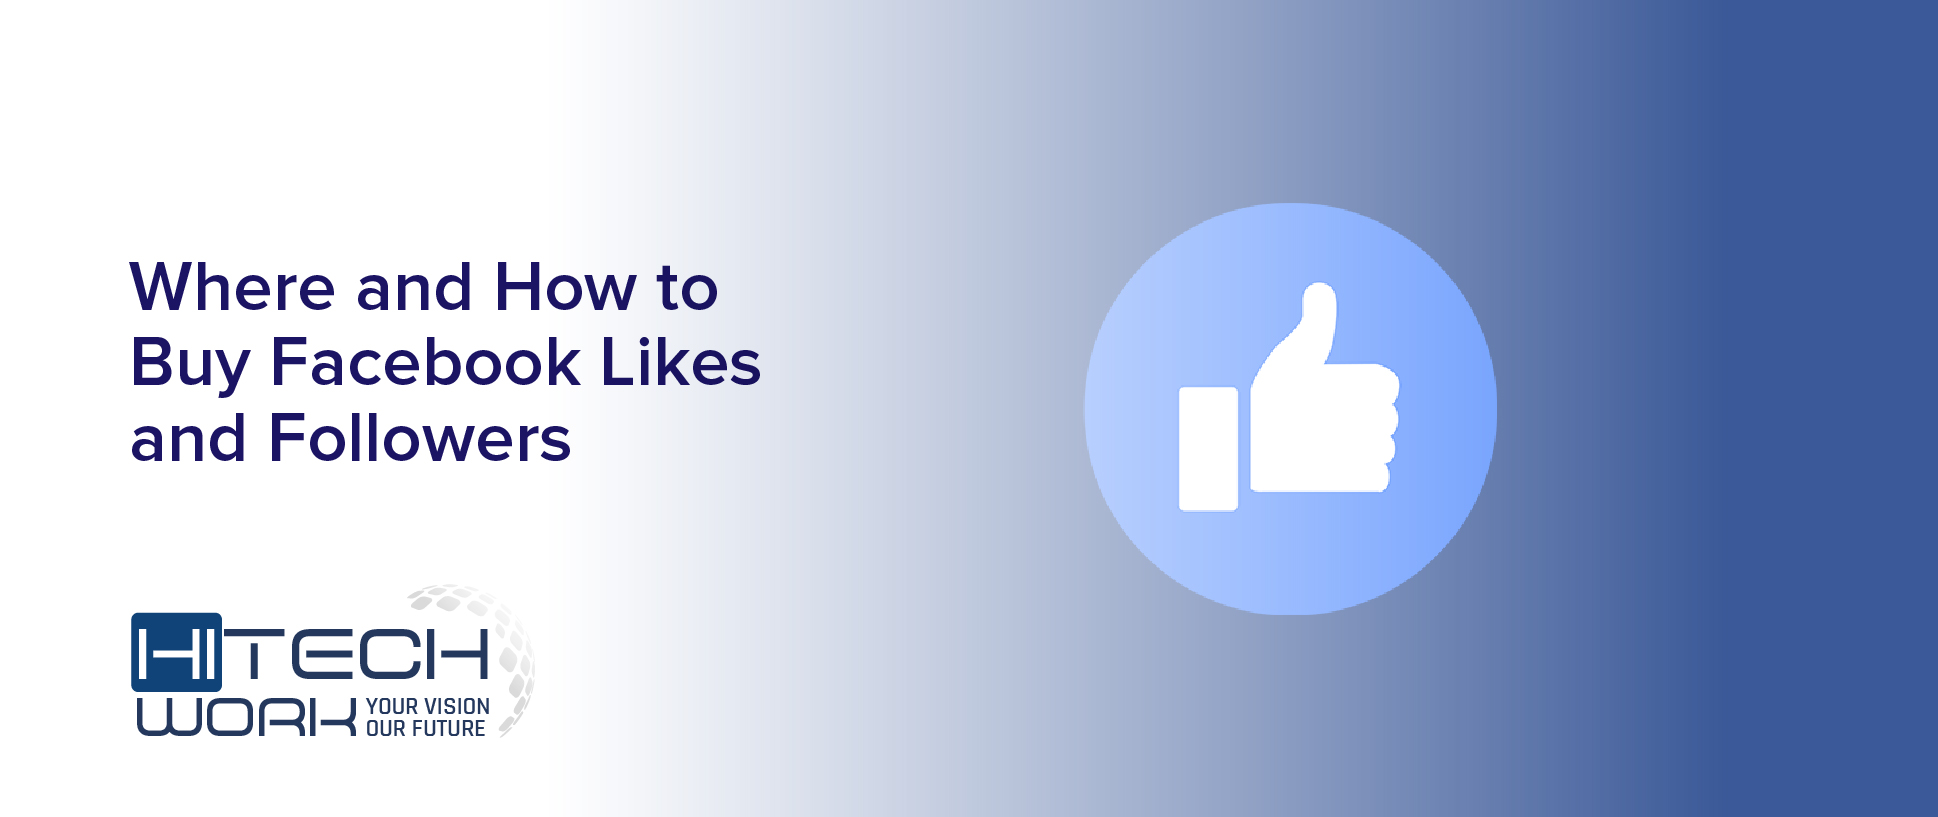 Buy Facebook Likes and Followers